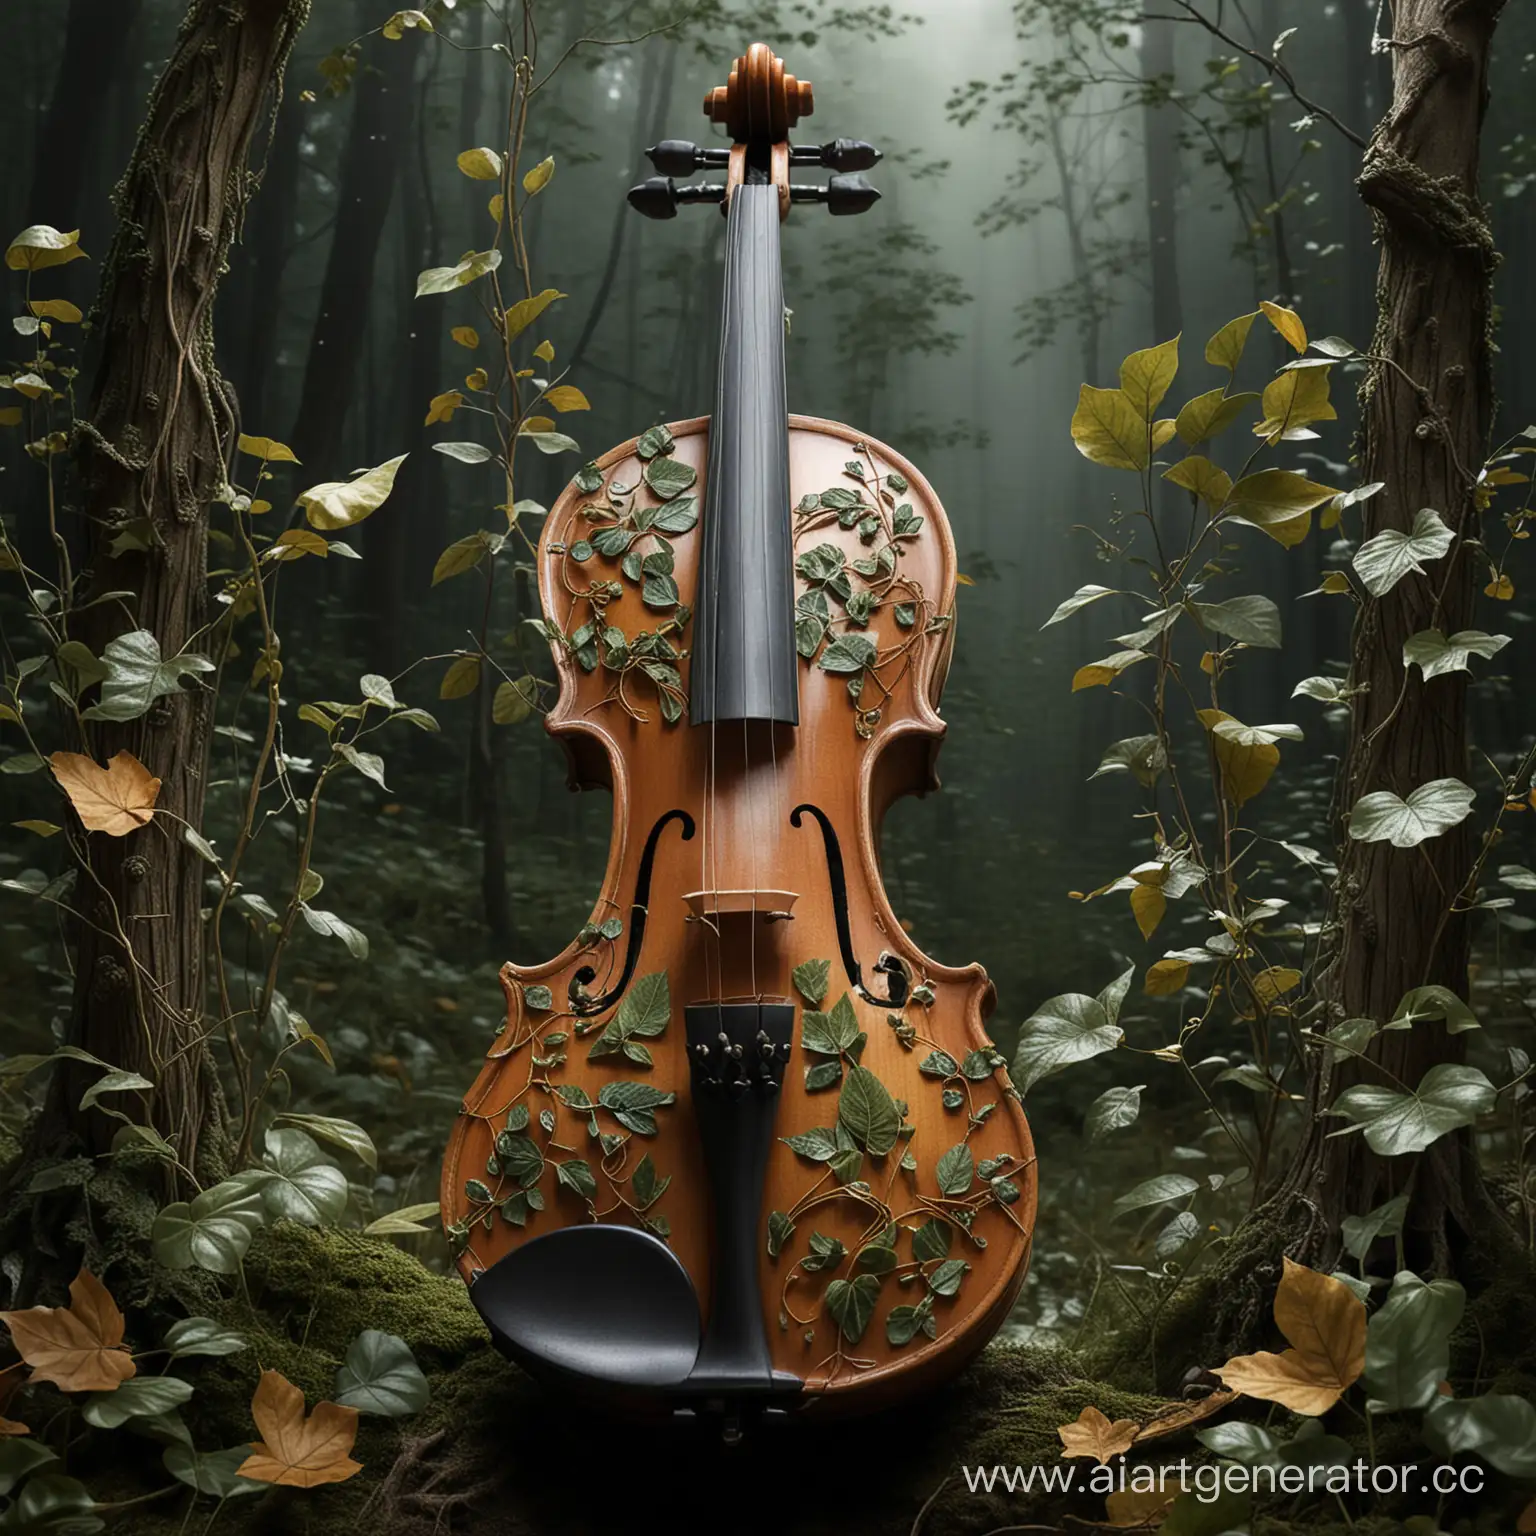 Enchanted-Forest-Violin-Decorated-with-Leaves-and-Vines